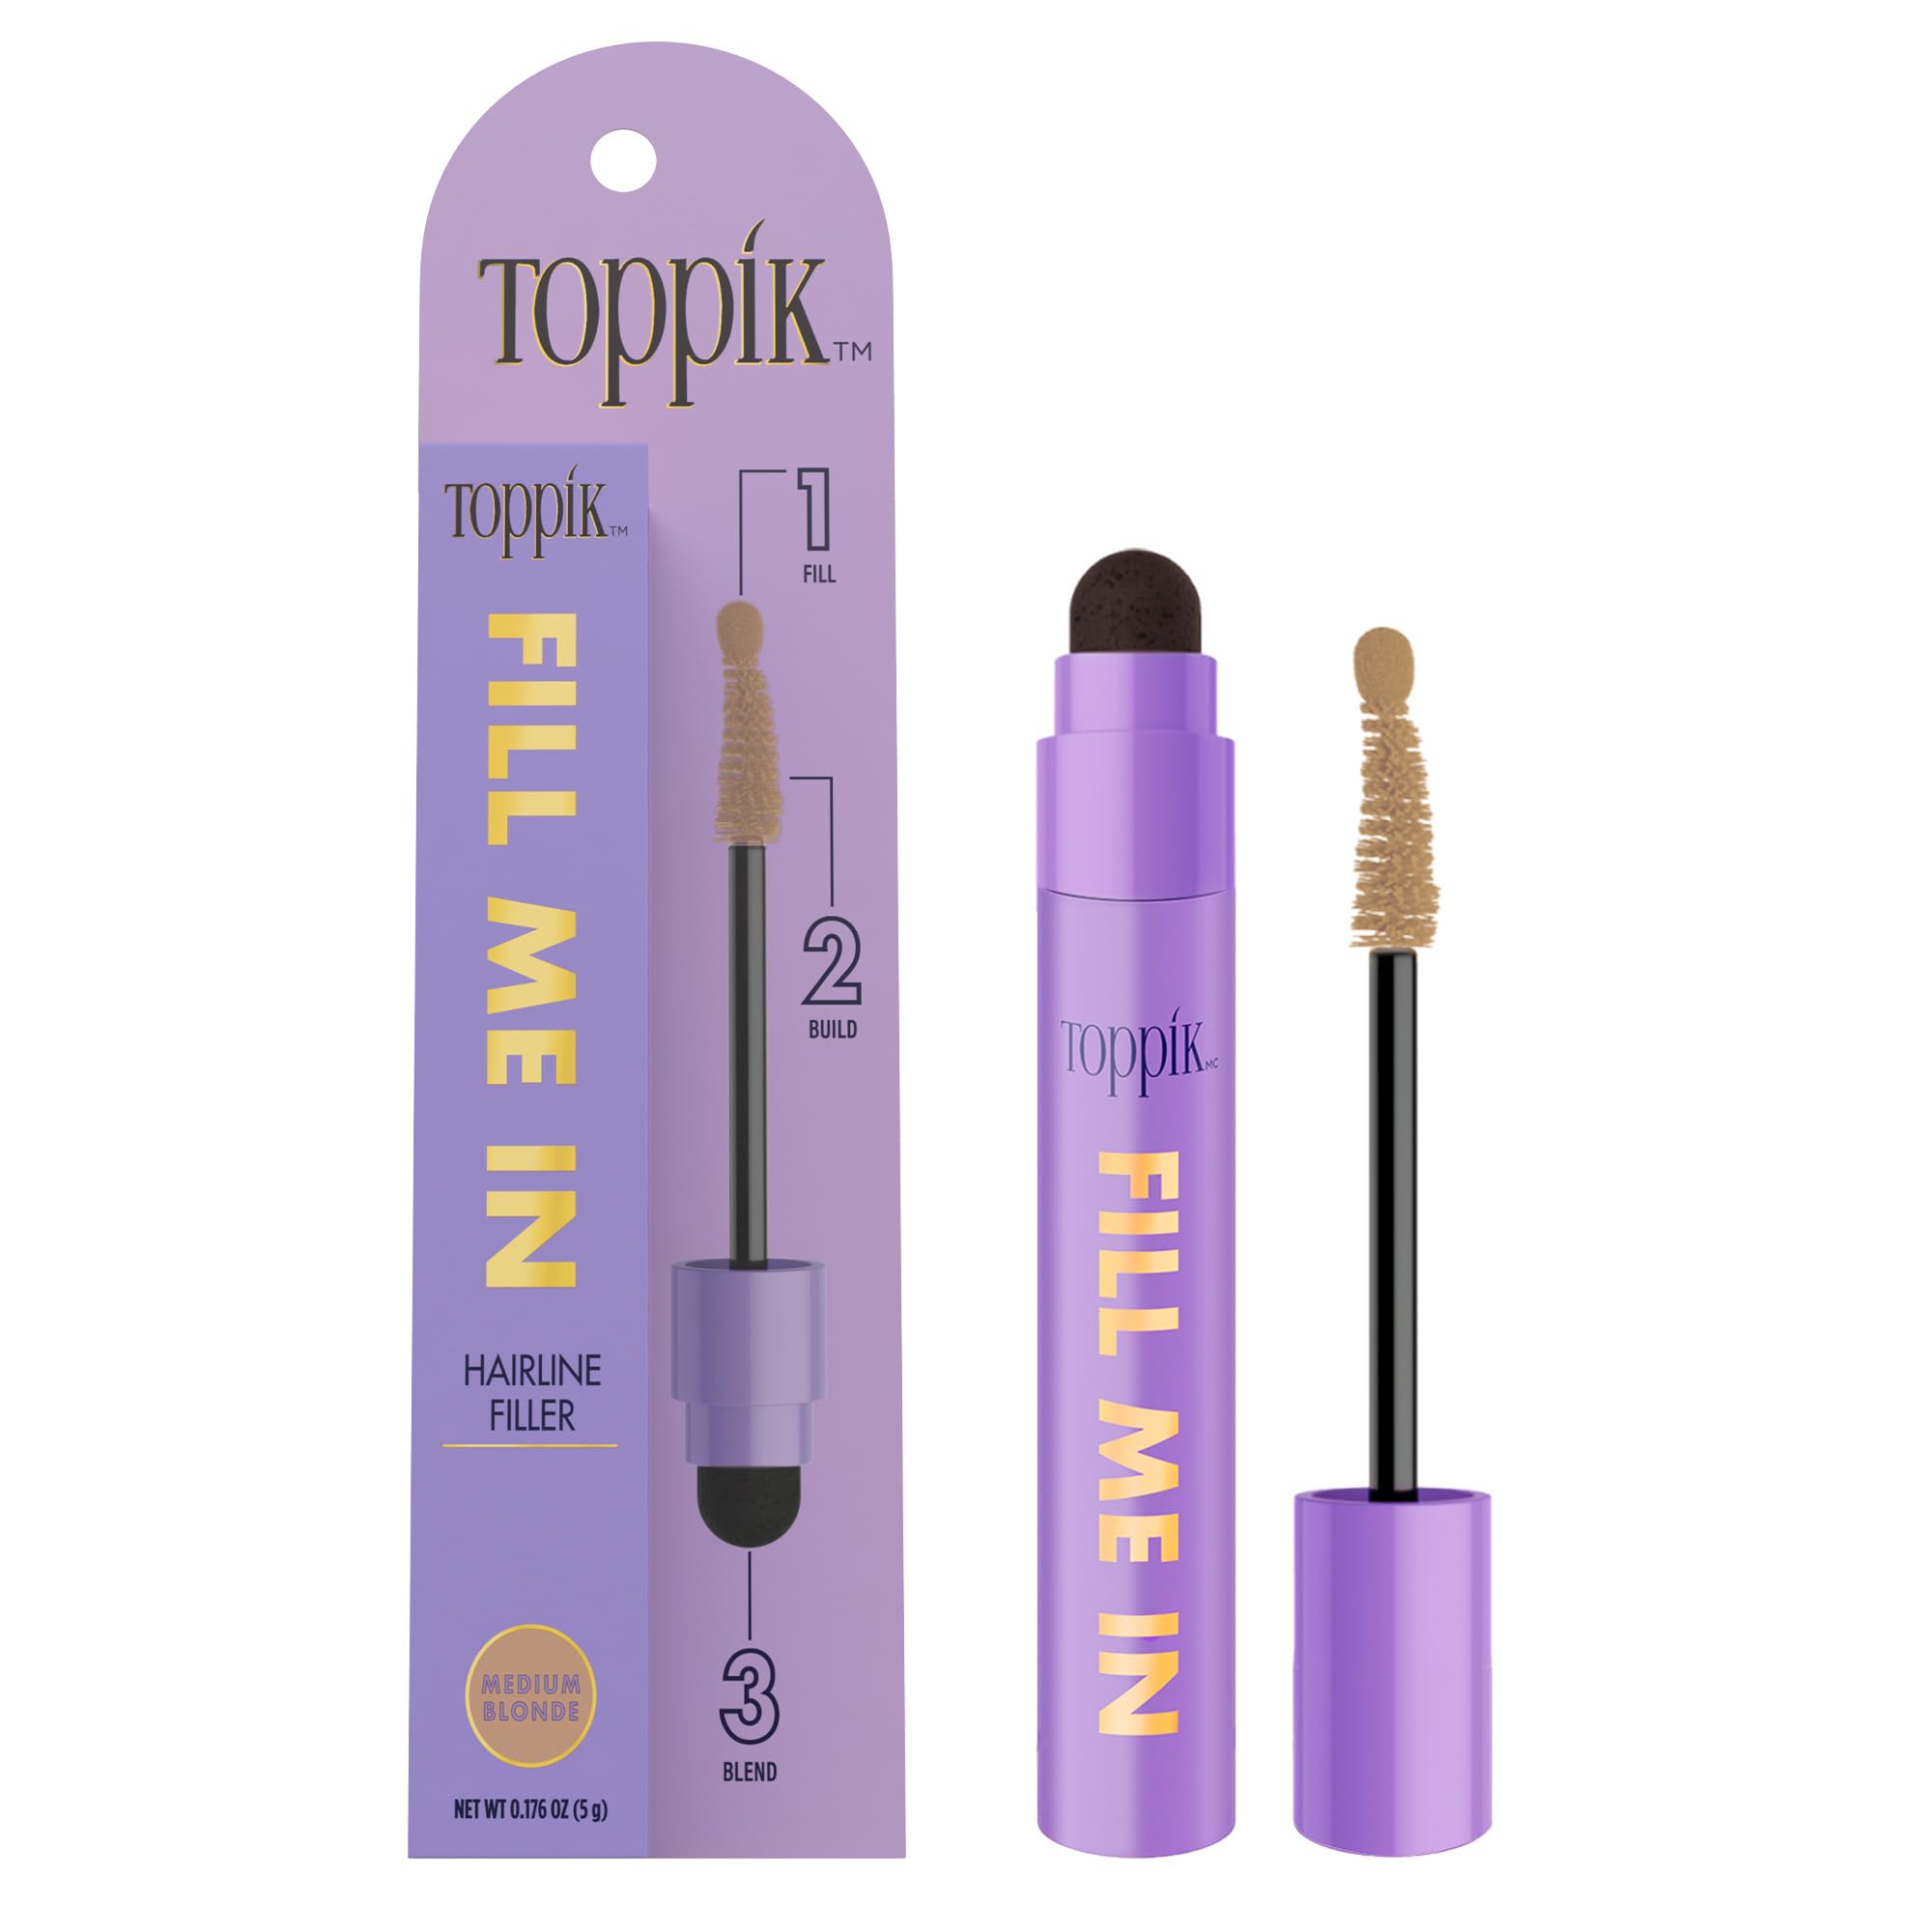 Toppik Fill Me In Hairline Filler, Hair Color Root Touchup, Hair Fibers Wand, Fills In Thinning Hairline, Hair Styling Product, 0.176 oz (5 g), Medium Blonde